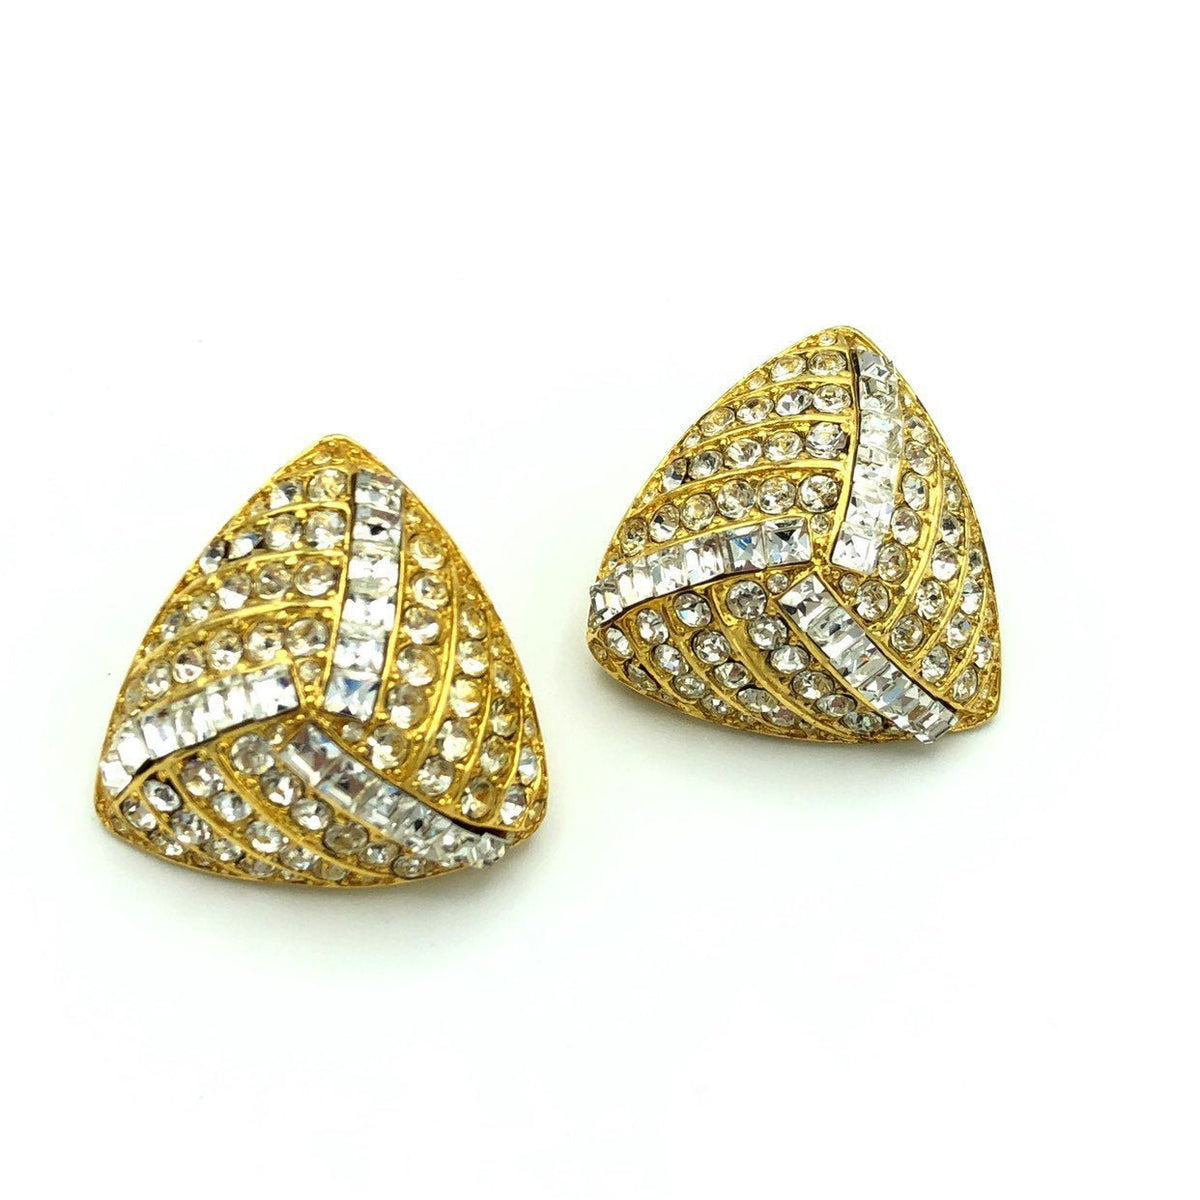 Vintage Over-sized Gold Triangle Rhinestone Paved Clip-On Earrings - 24 Wishes Vintage Jewelry